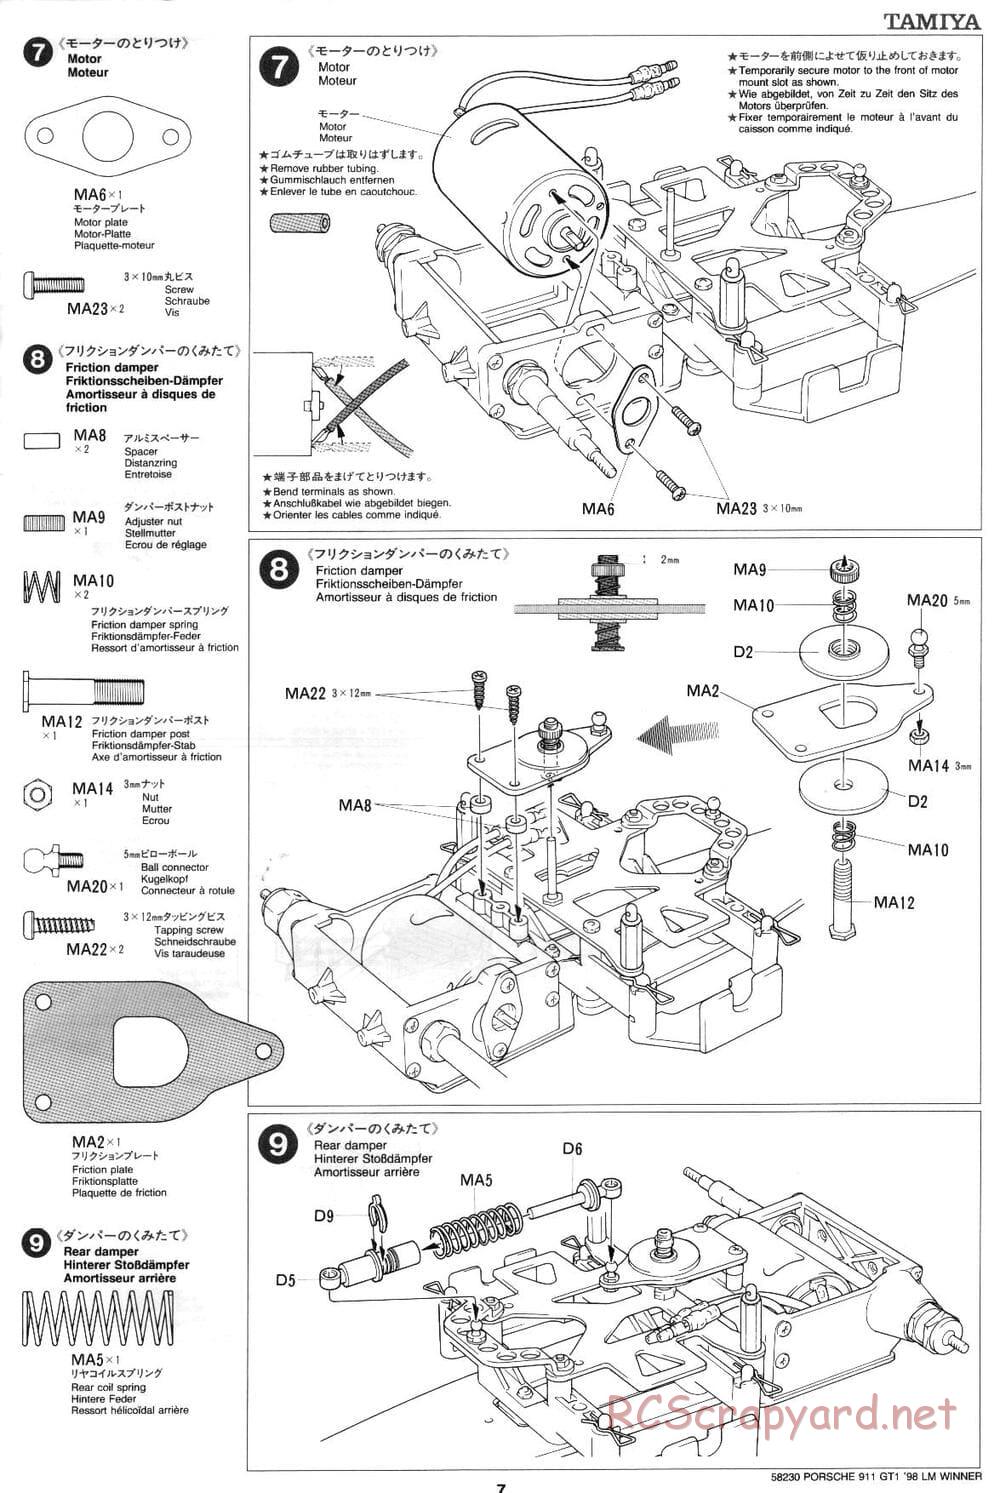 Tamiya - Porsche 911 GT1 98 LM Winner - F103RS Chassis - Manual - Page 7